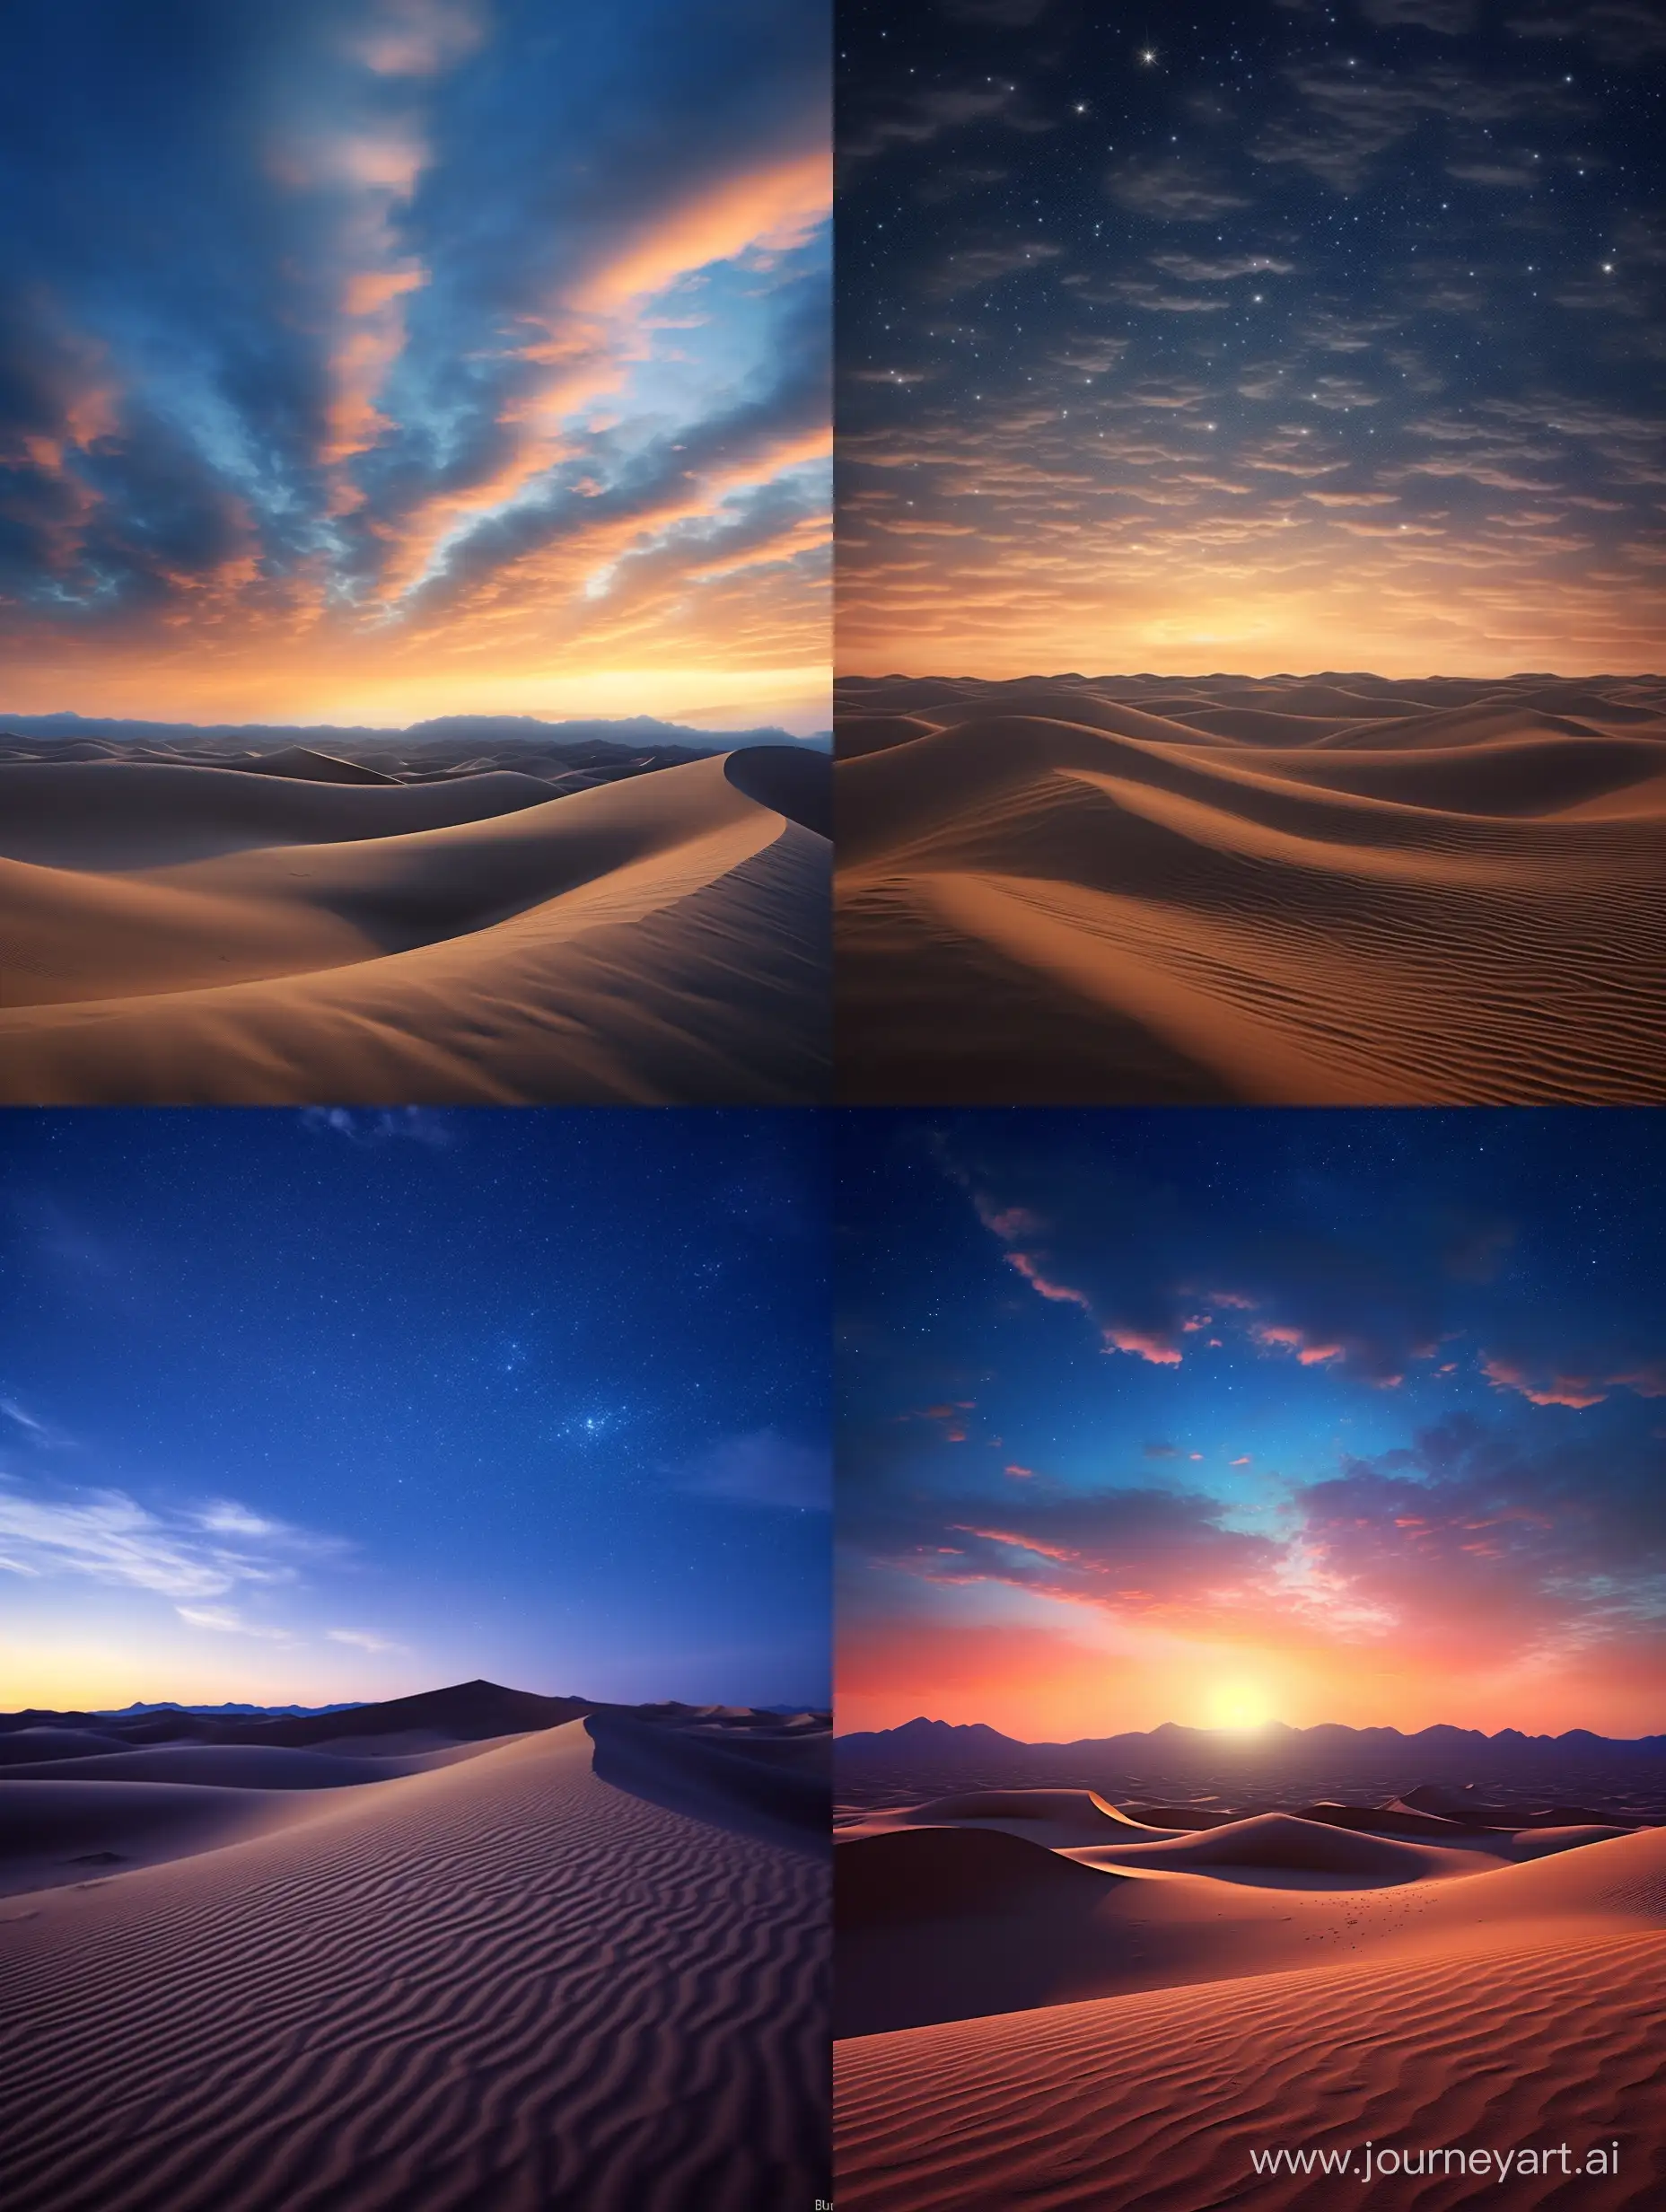 Envision a desert at twilight, where sand dunes transform into golden waves beneath a sky ablaze with constellations.